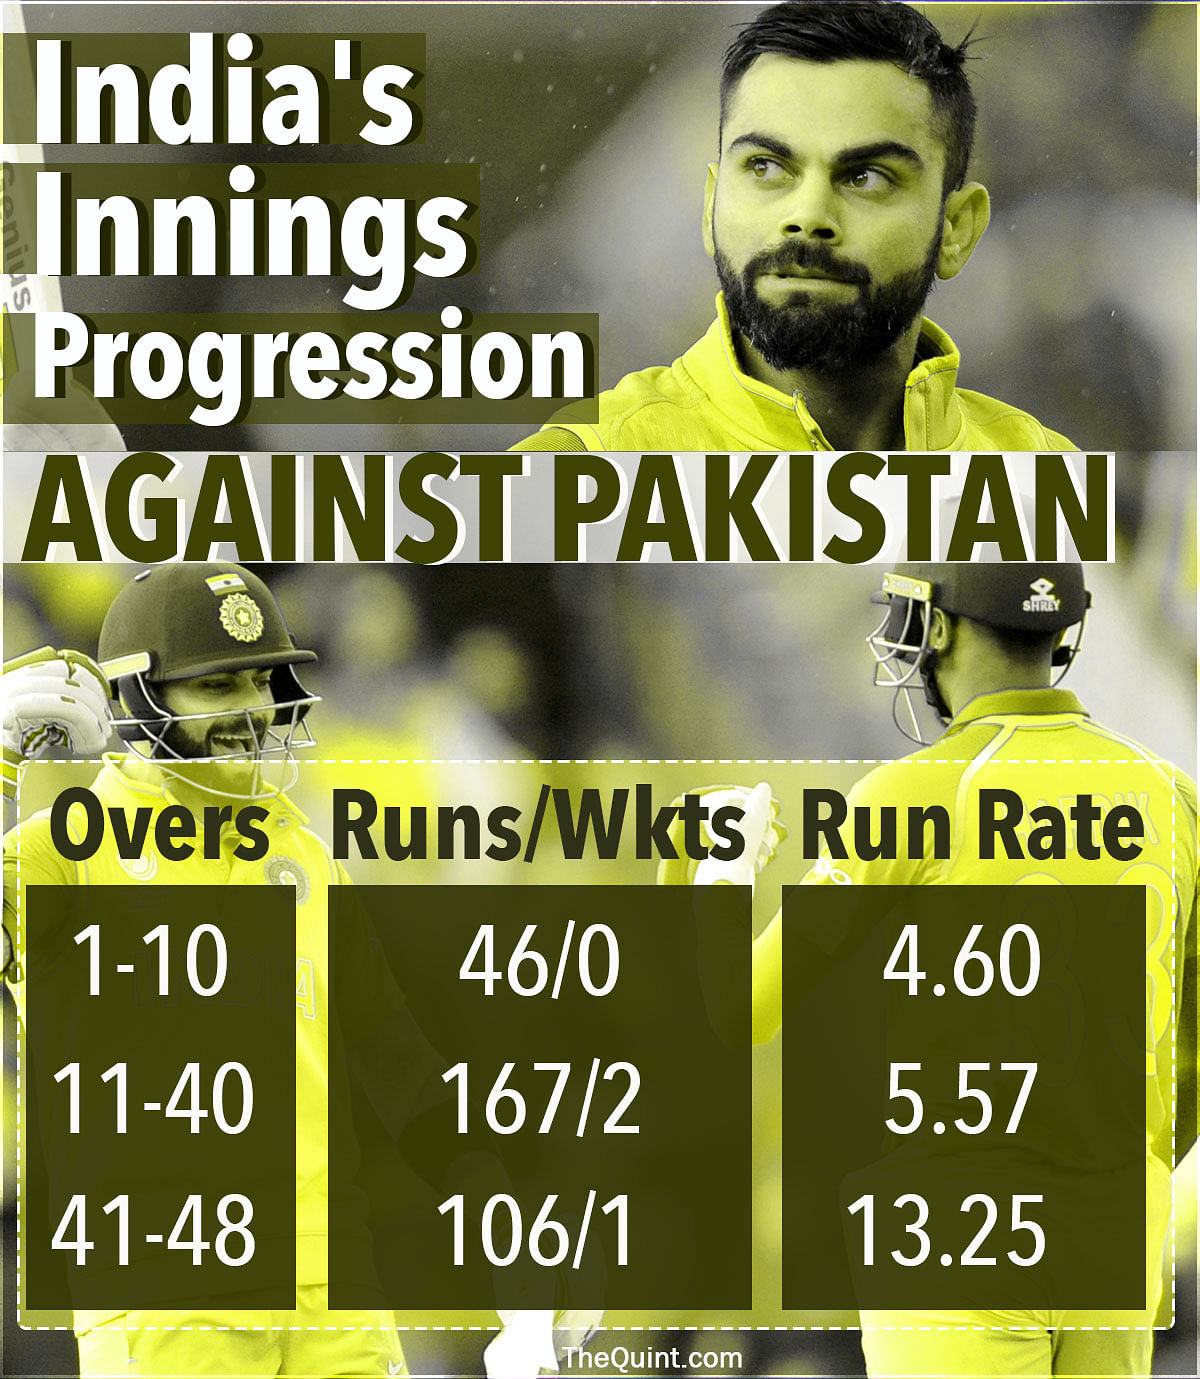 India vs Pakistan match ended up becoming a pretty one-sided contest.